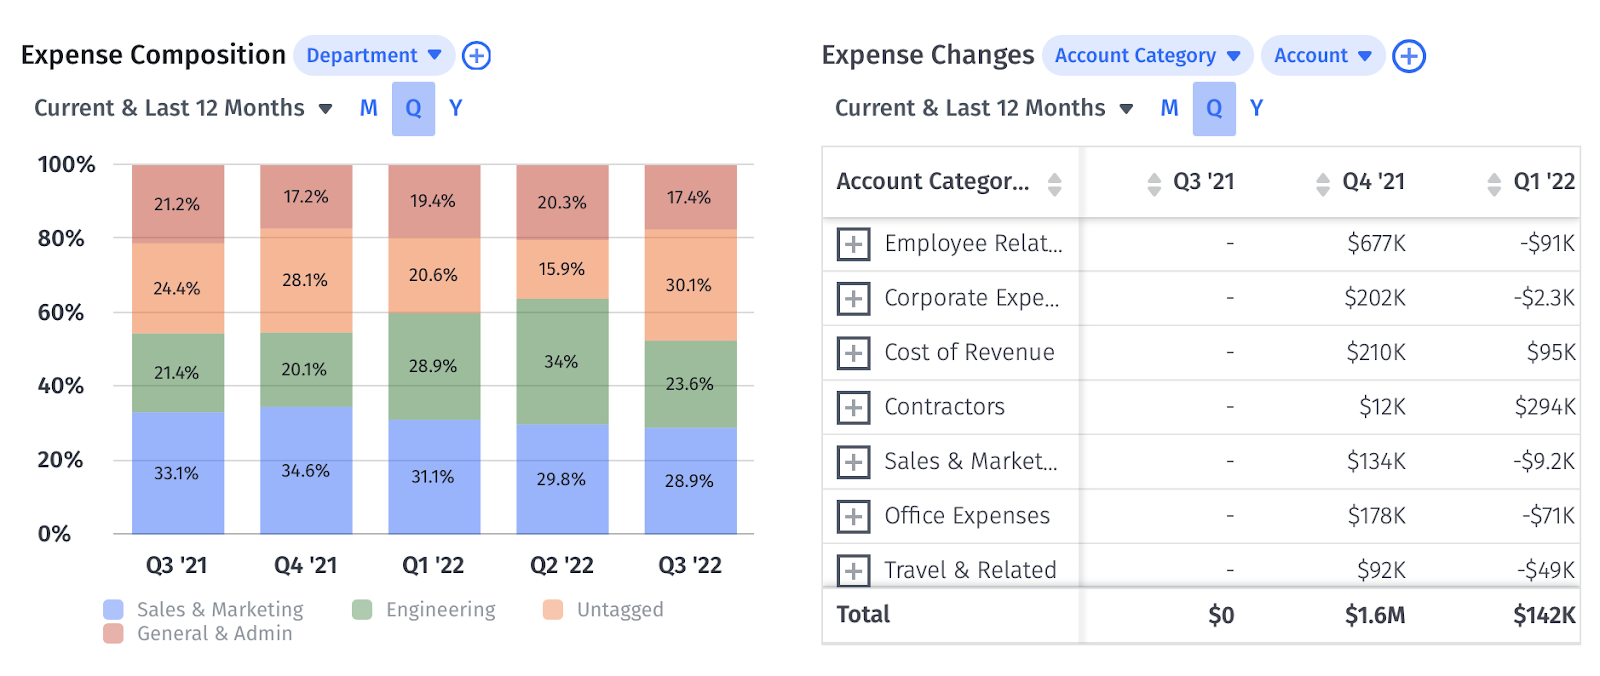 Visualizations of expense composition in a chart and expense changes in a table